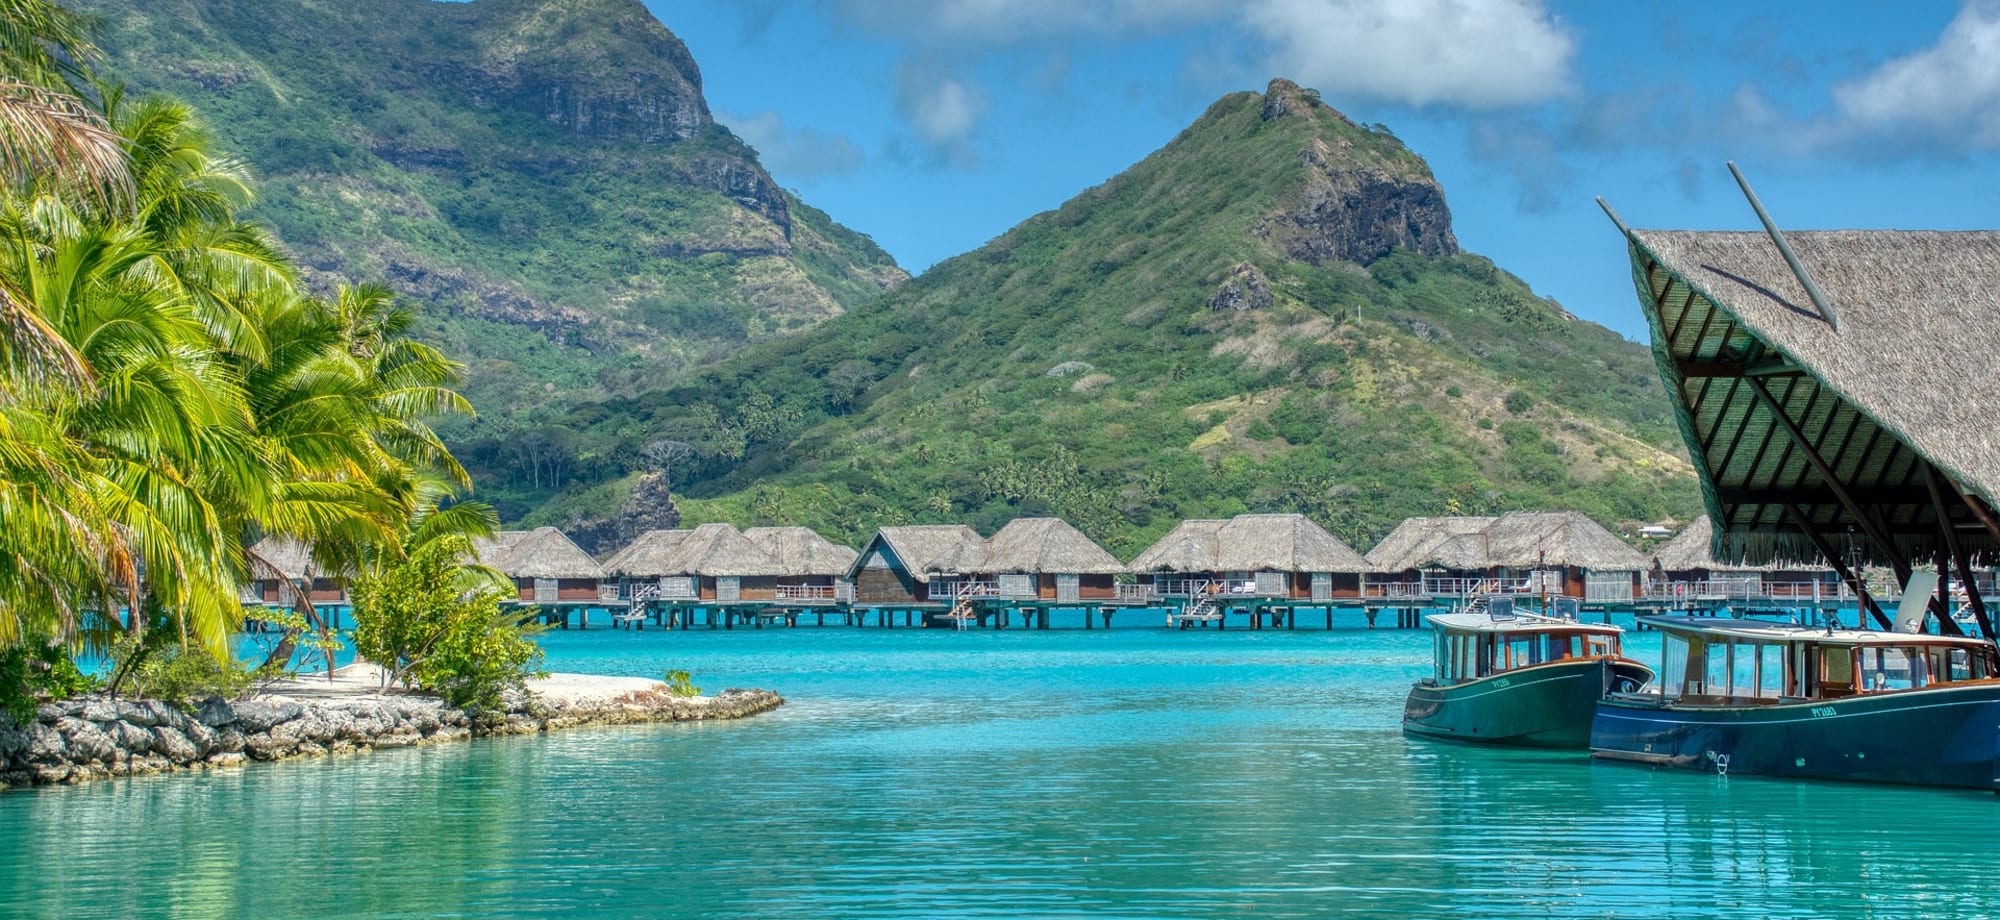 Overwater villas are backed by towering green mountains, palm trees and glistening turquoise waters. 